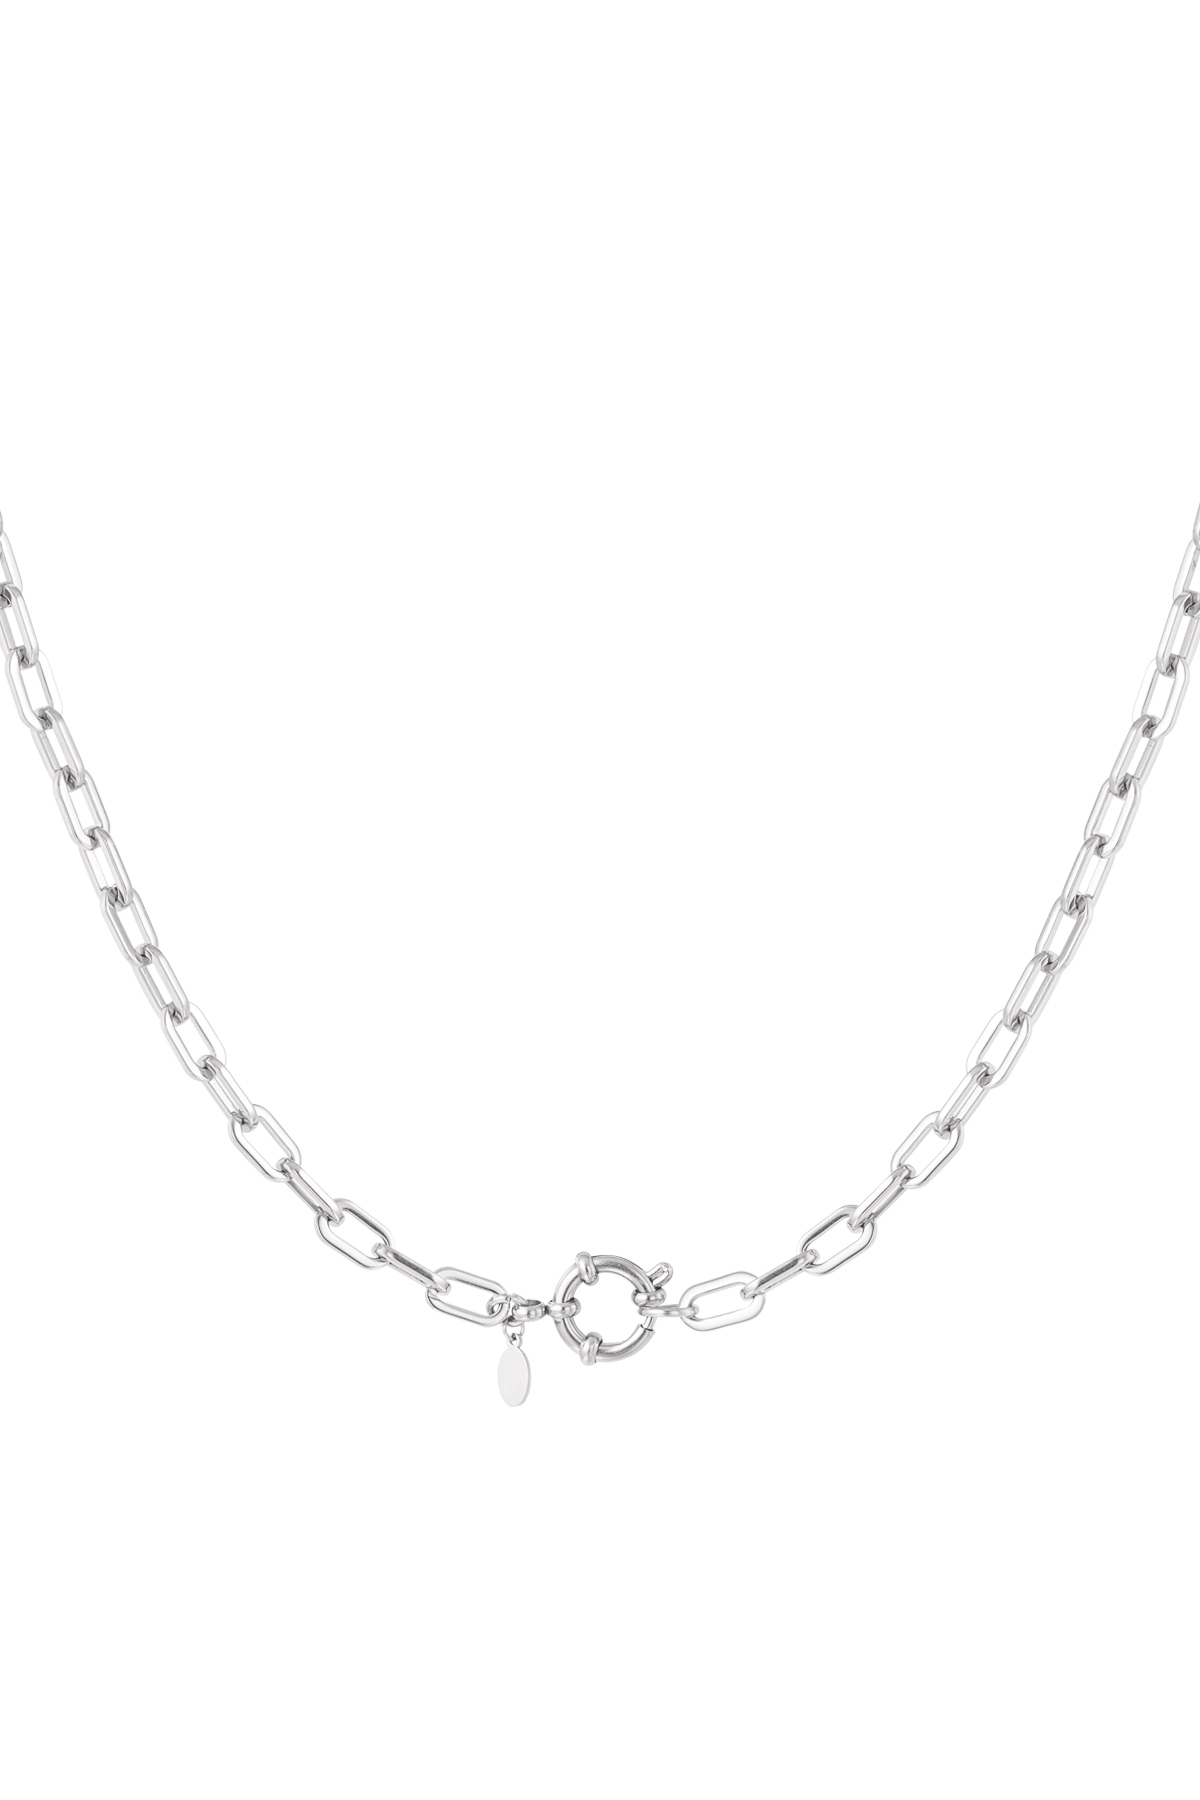 Necklace basic links round closure - silver